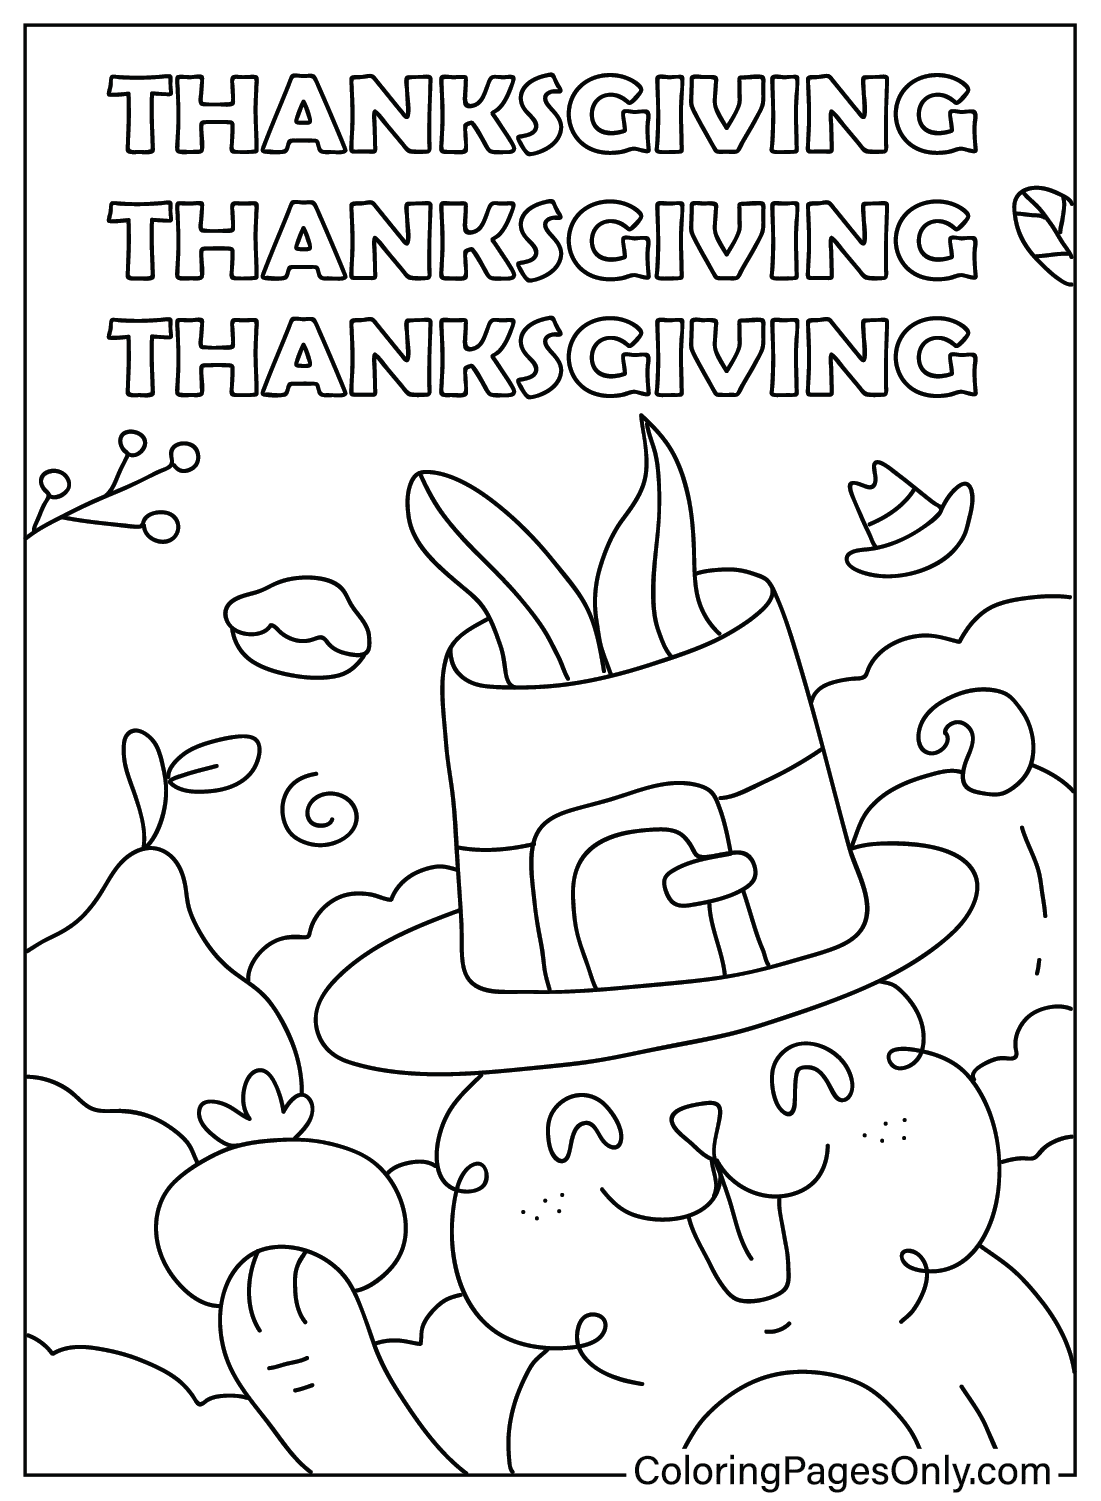 Thanksgiving Coloring Pages for Adults